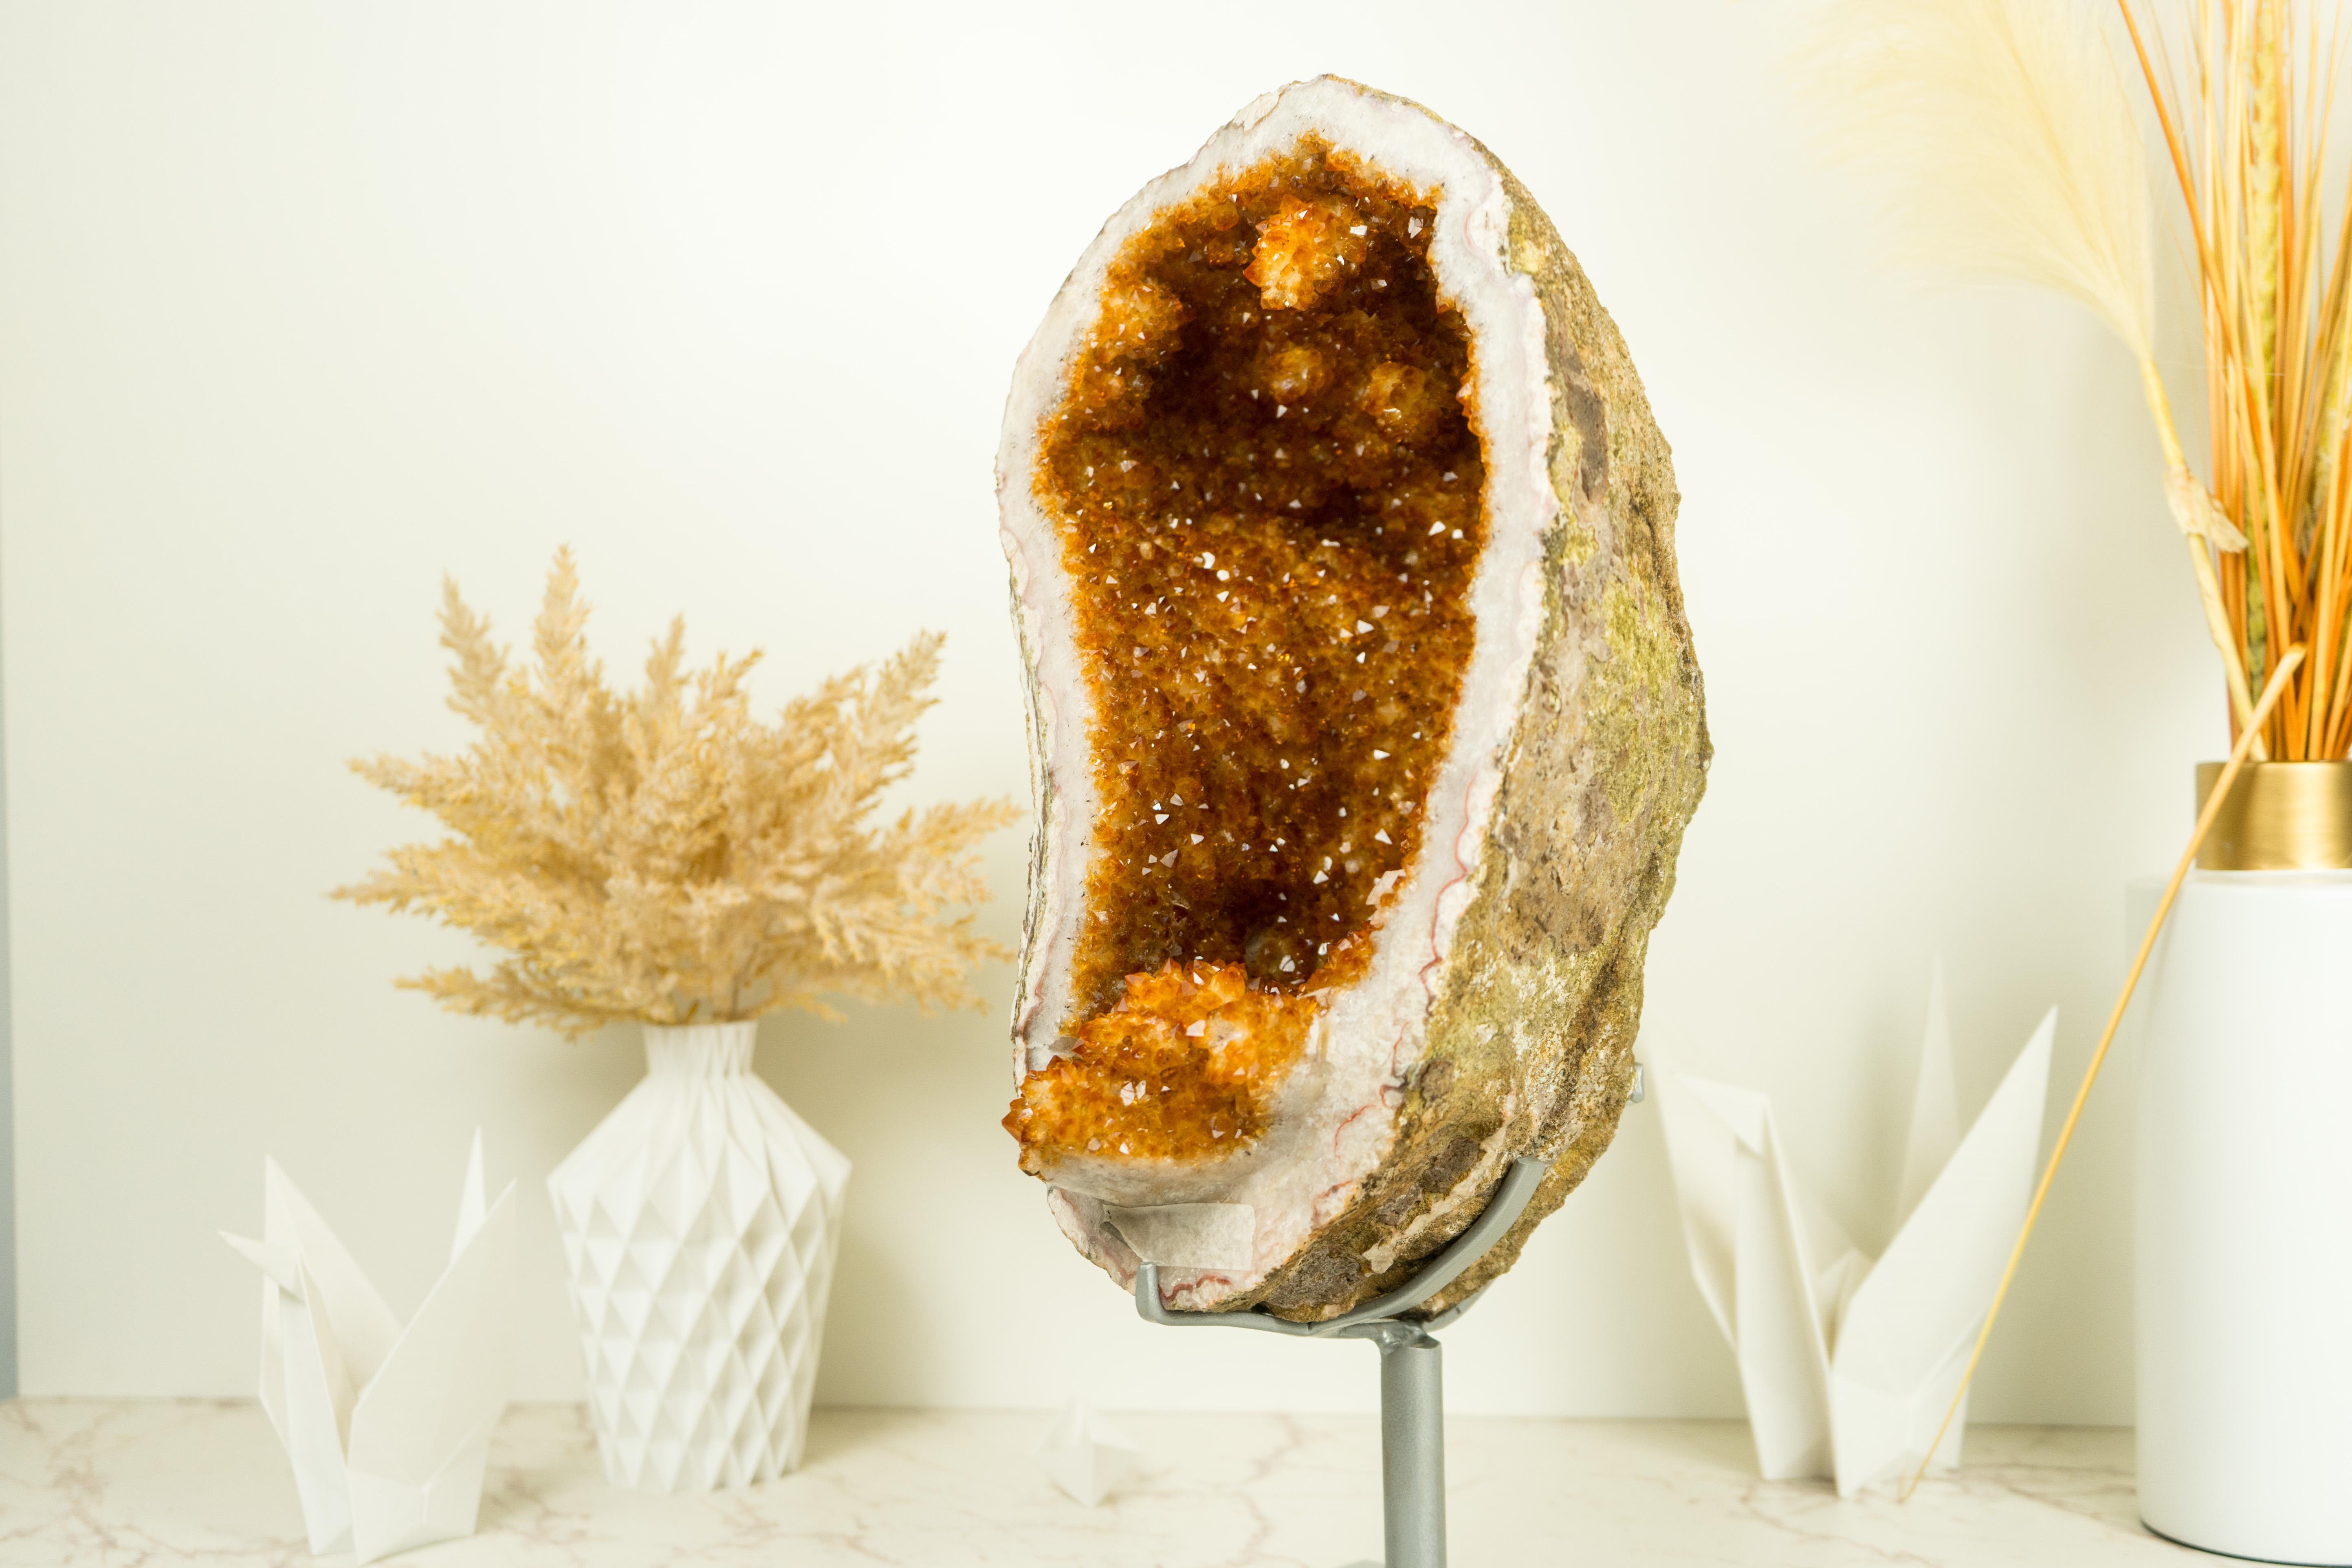 Citrine Geode with Stalactite Flower Formations and Deep Orange Citrine Crystal For Sale 2